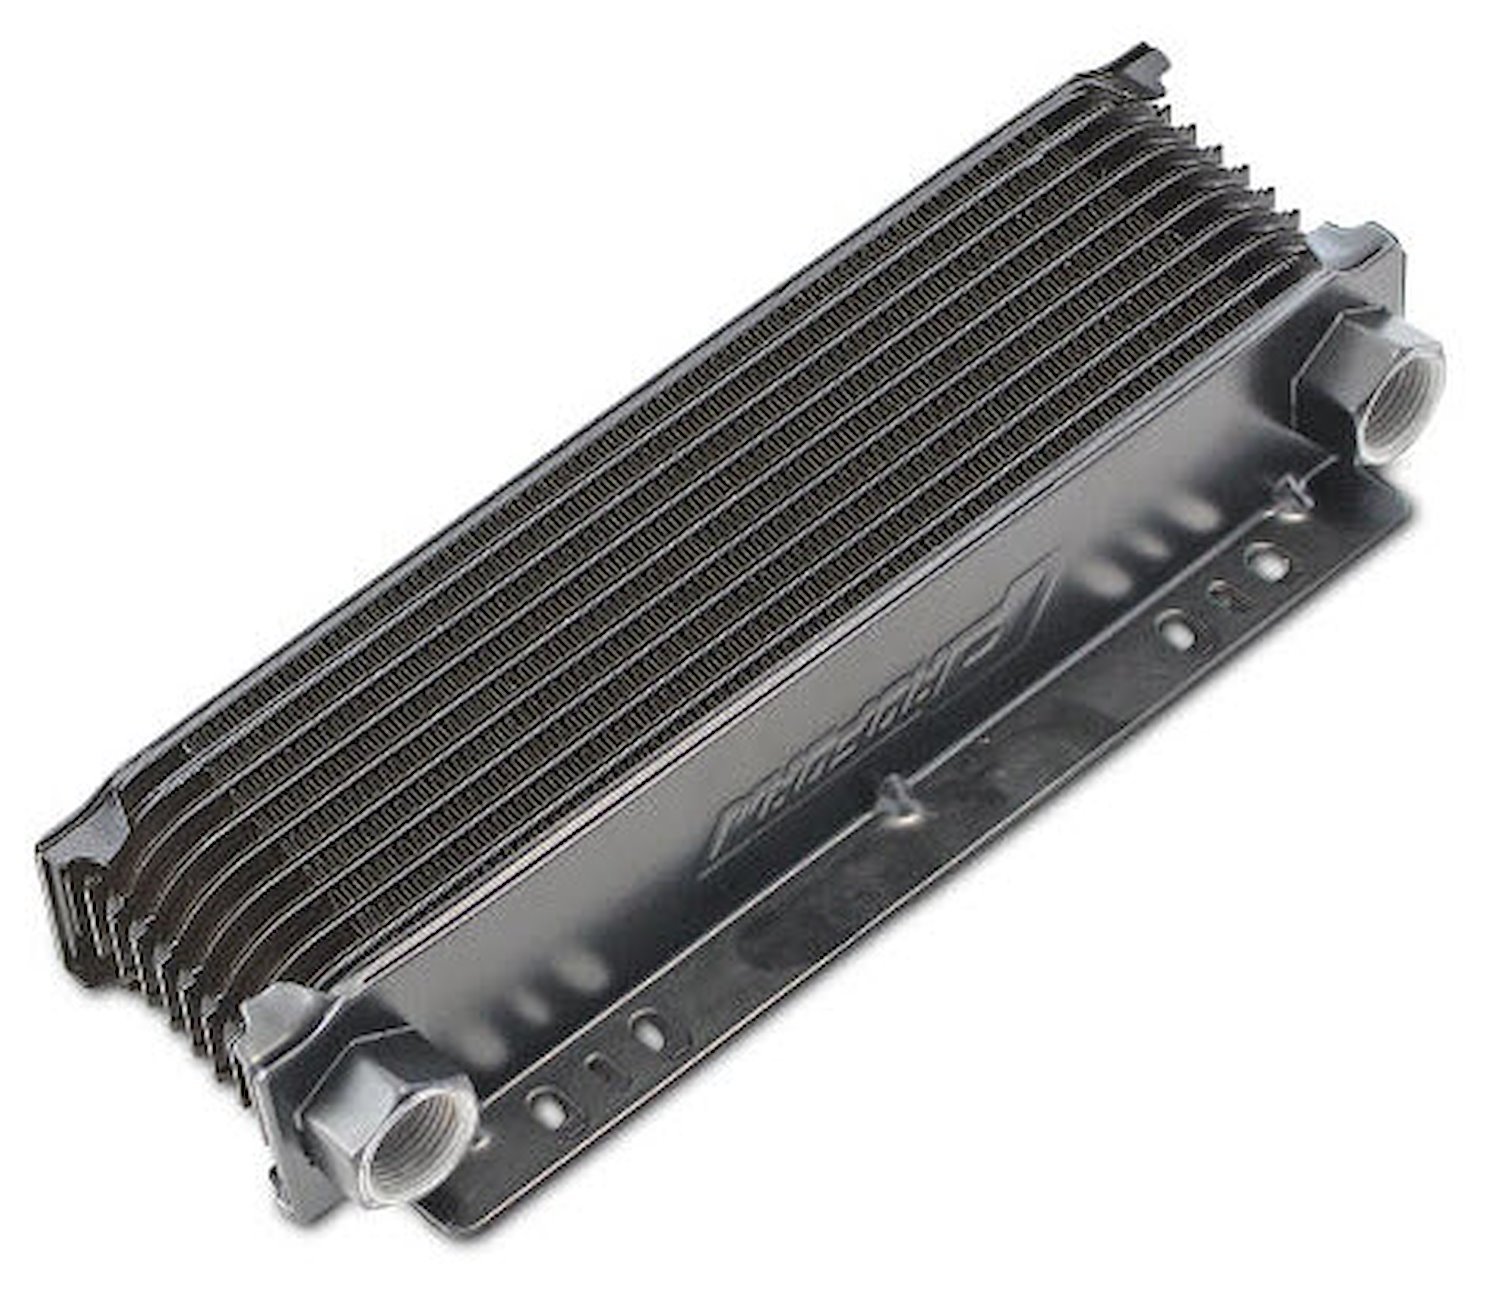 69570-10 Tundra Series Universal 10-Plate Oil & Transmission Cooler